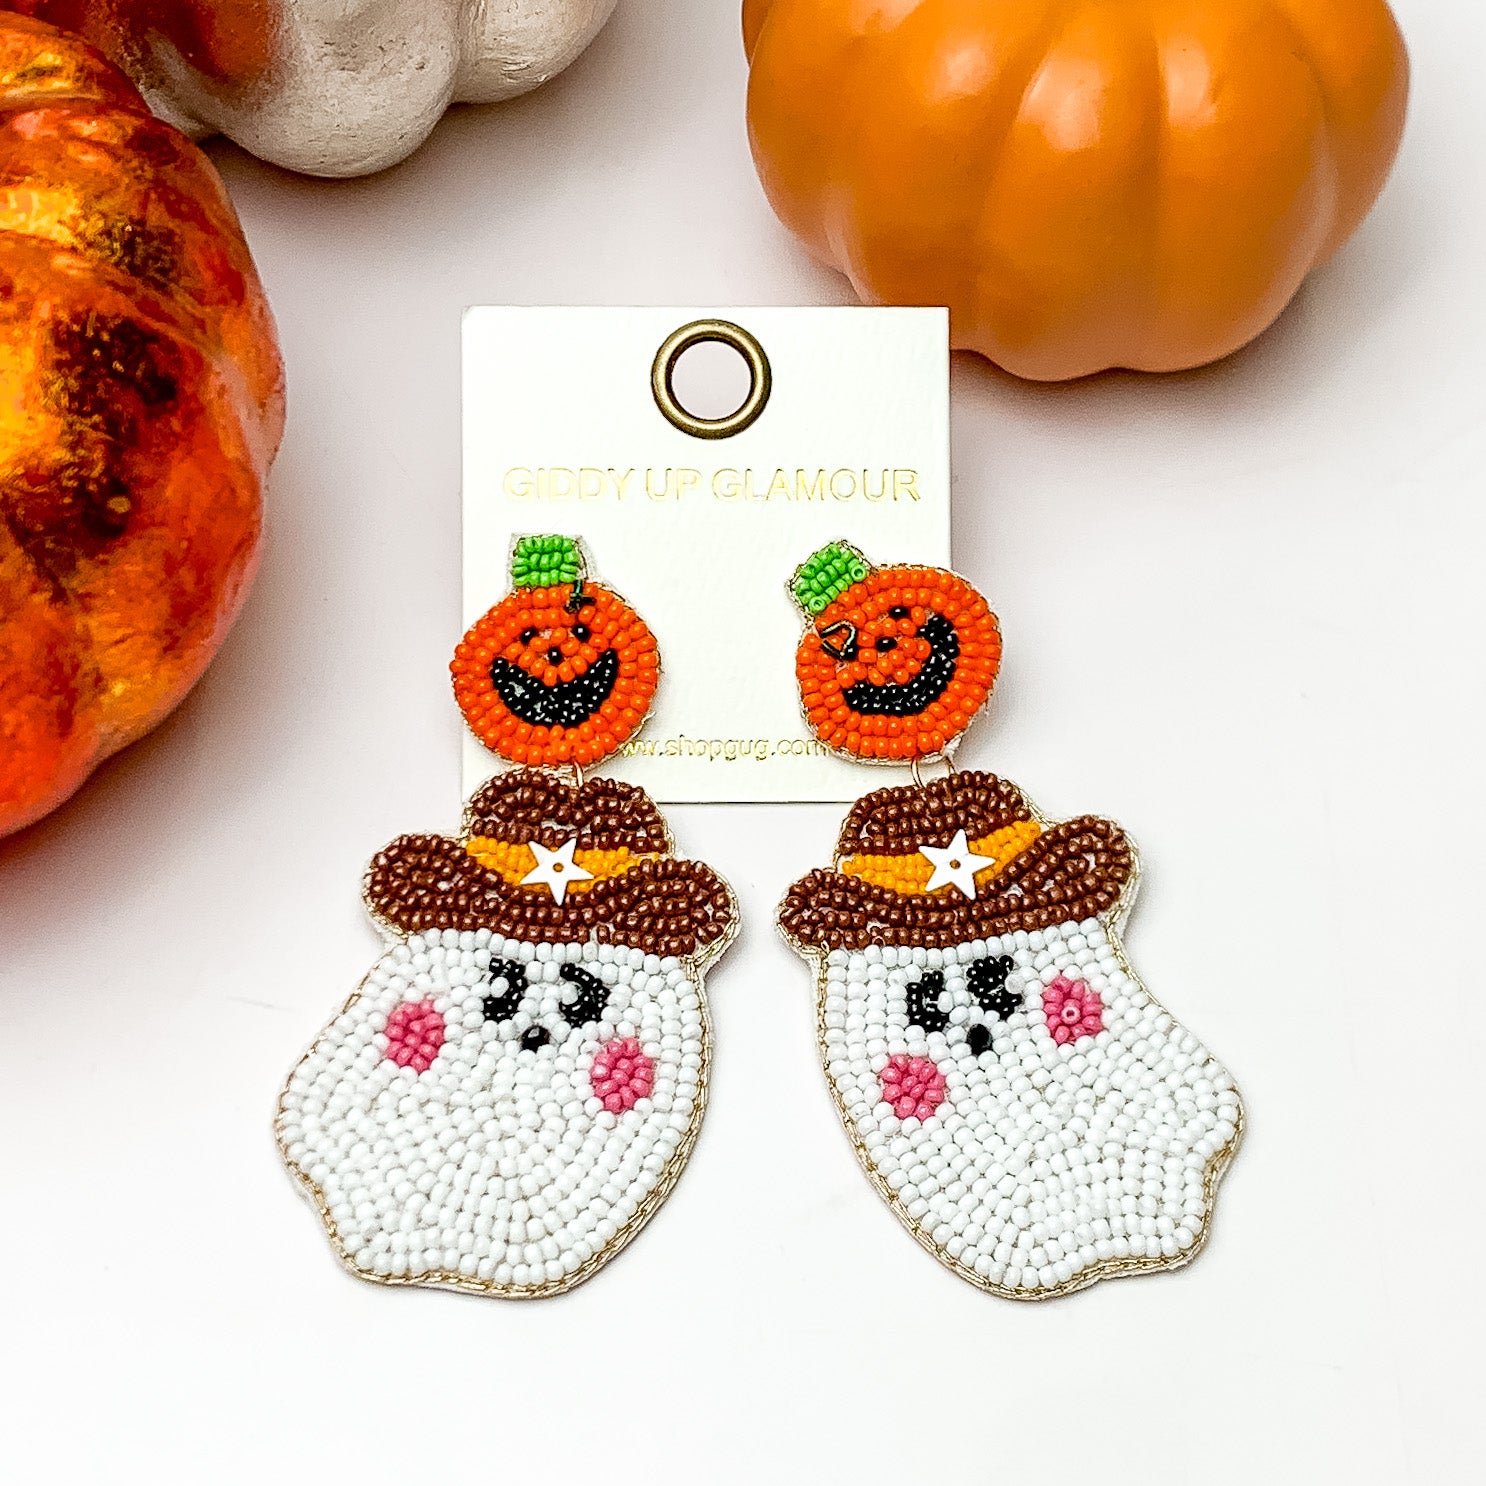 Beaded Cowboy Ghost Earrings with Orange Pumpkin Studs in White - Giddy Up Glamour Boutique